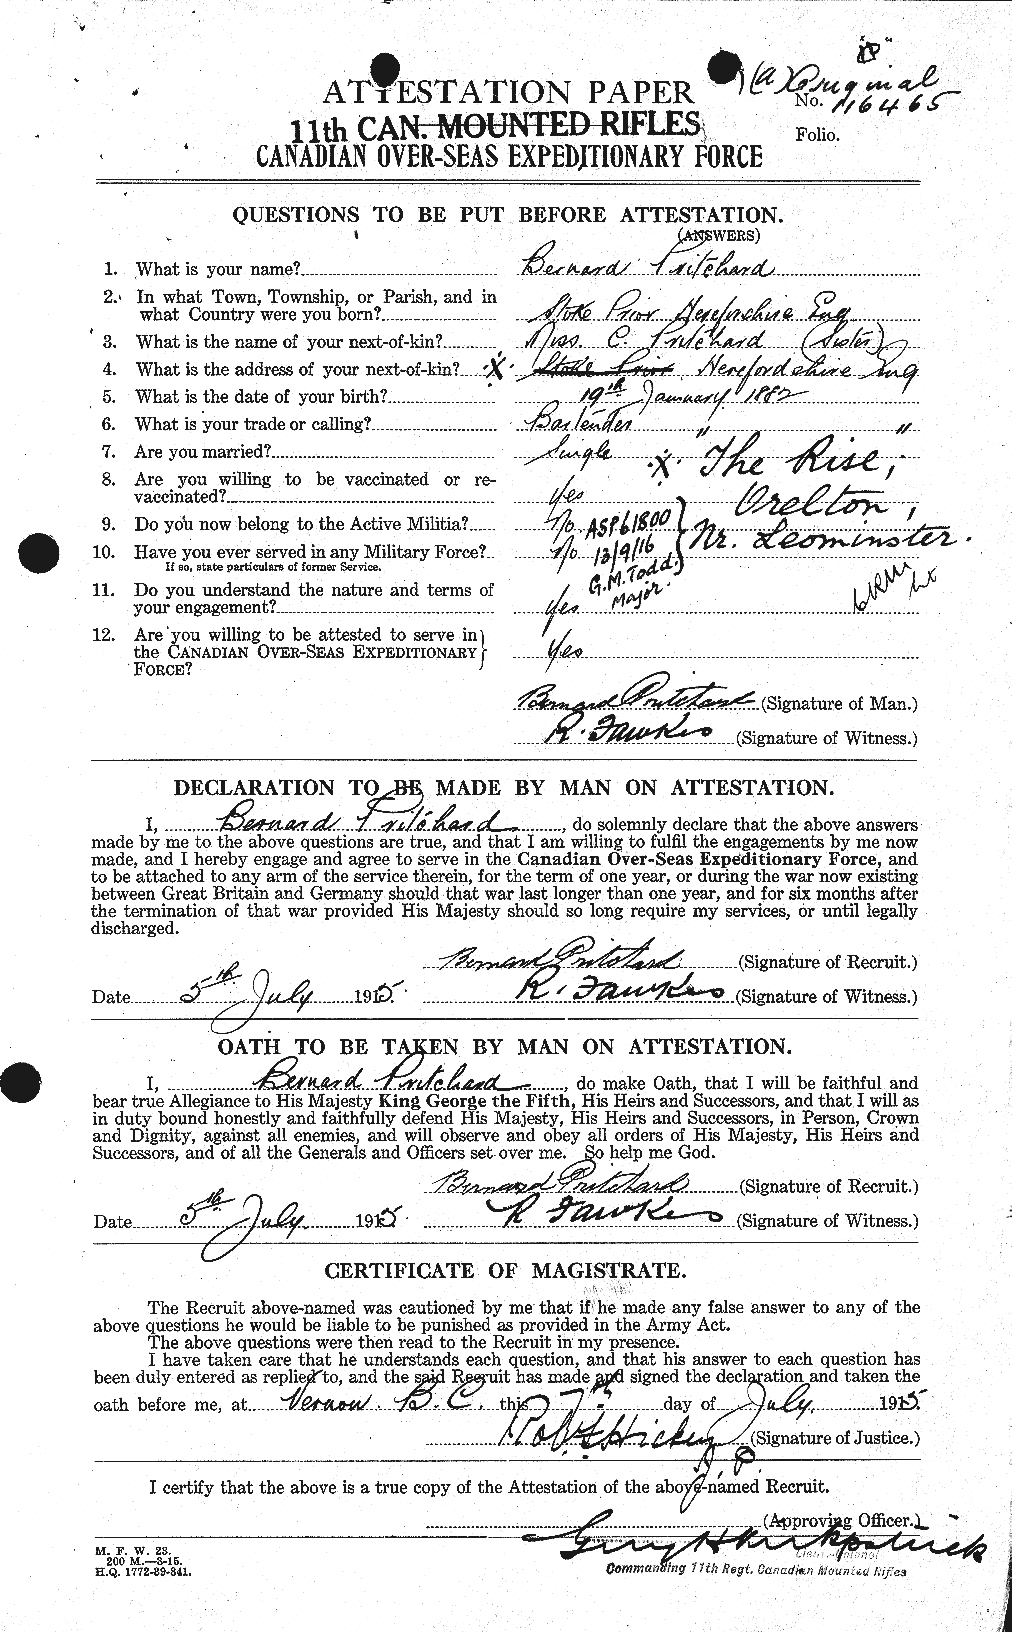 Personnel Records of the First World War - CEF 588489a